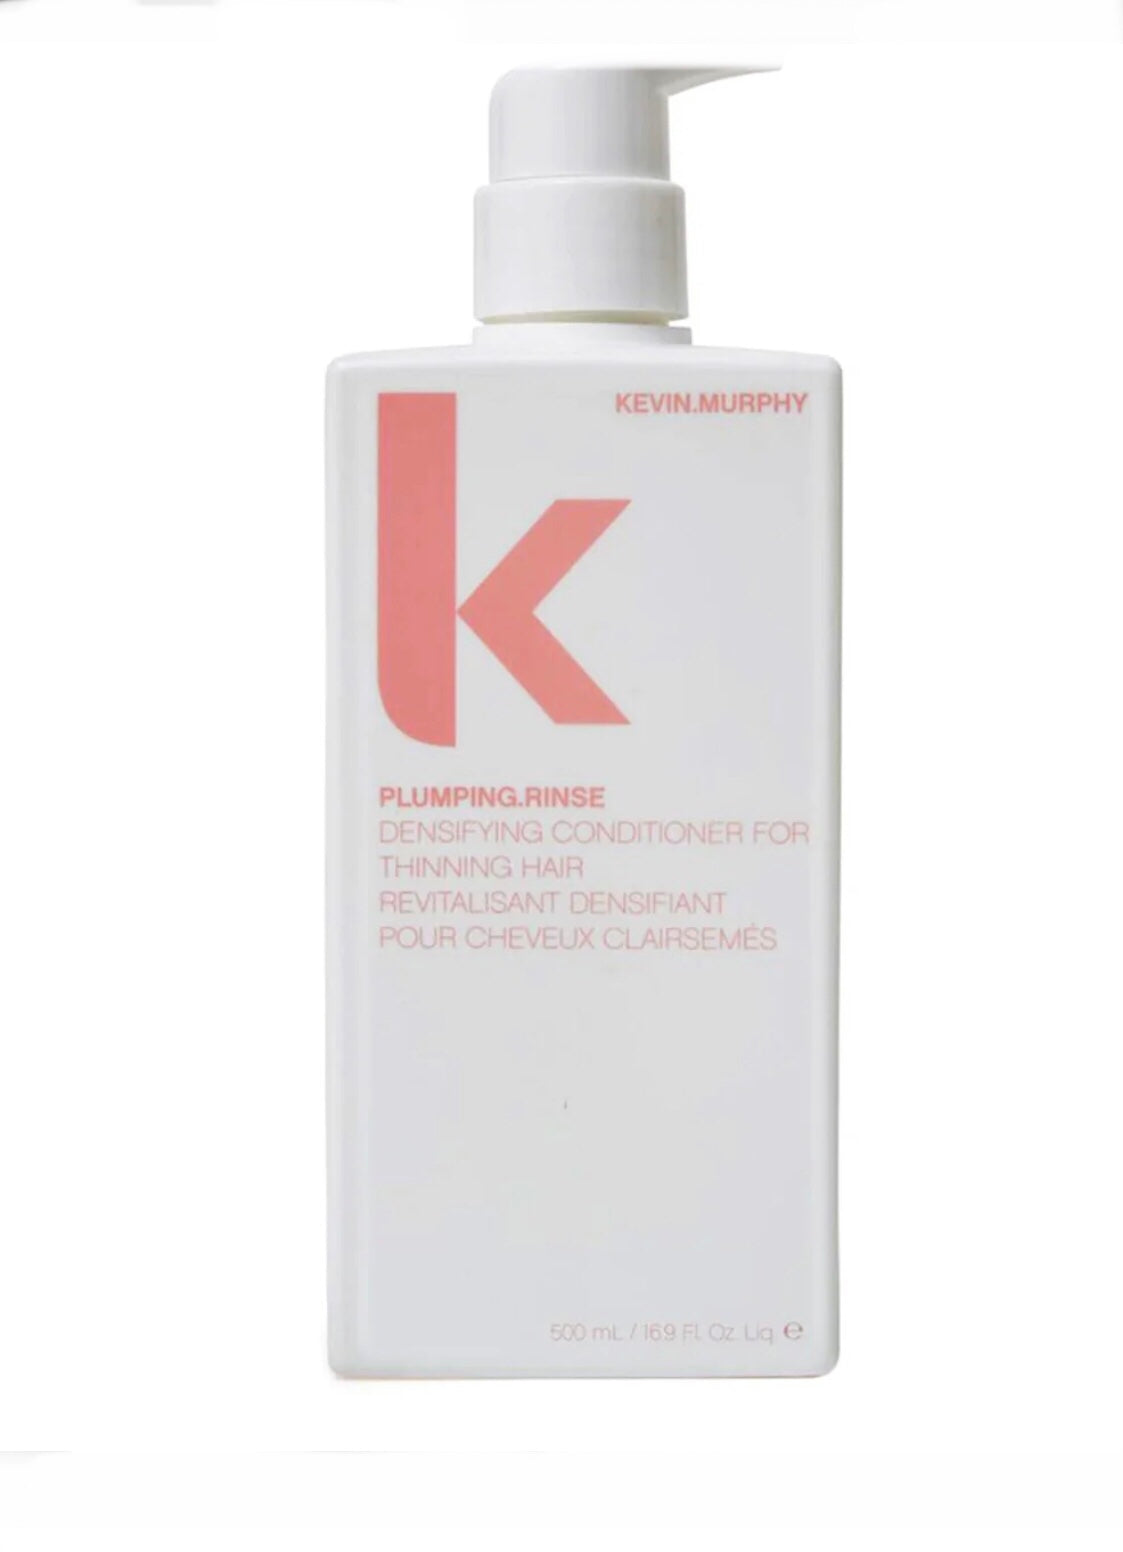 Kevin.Murphy - Plumping.Rinse conditioner  16.9 fl. oz. / 500 ml